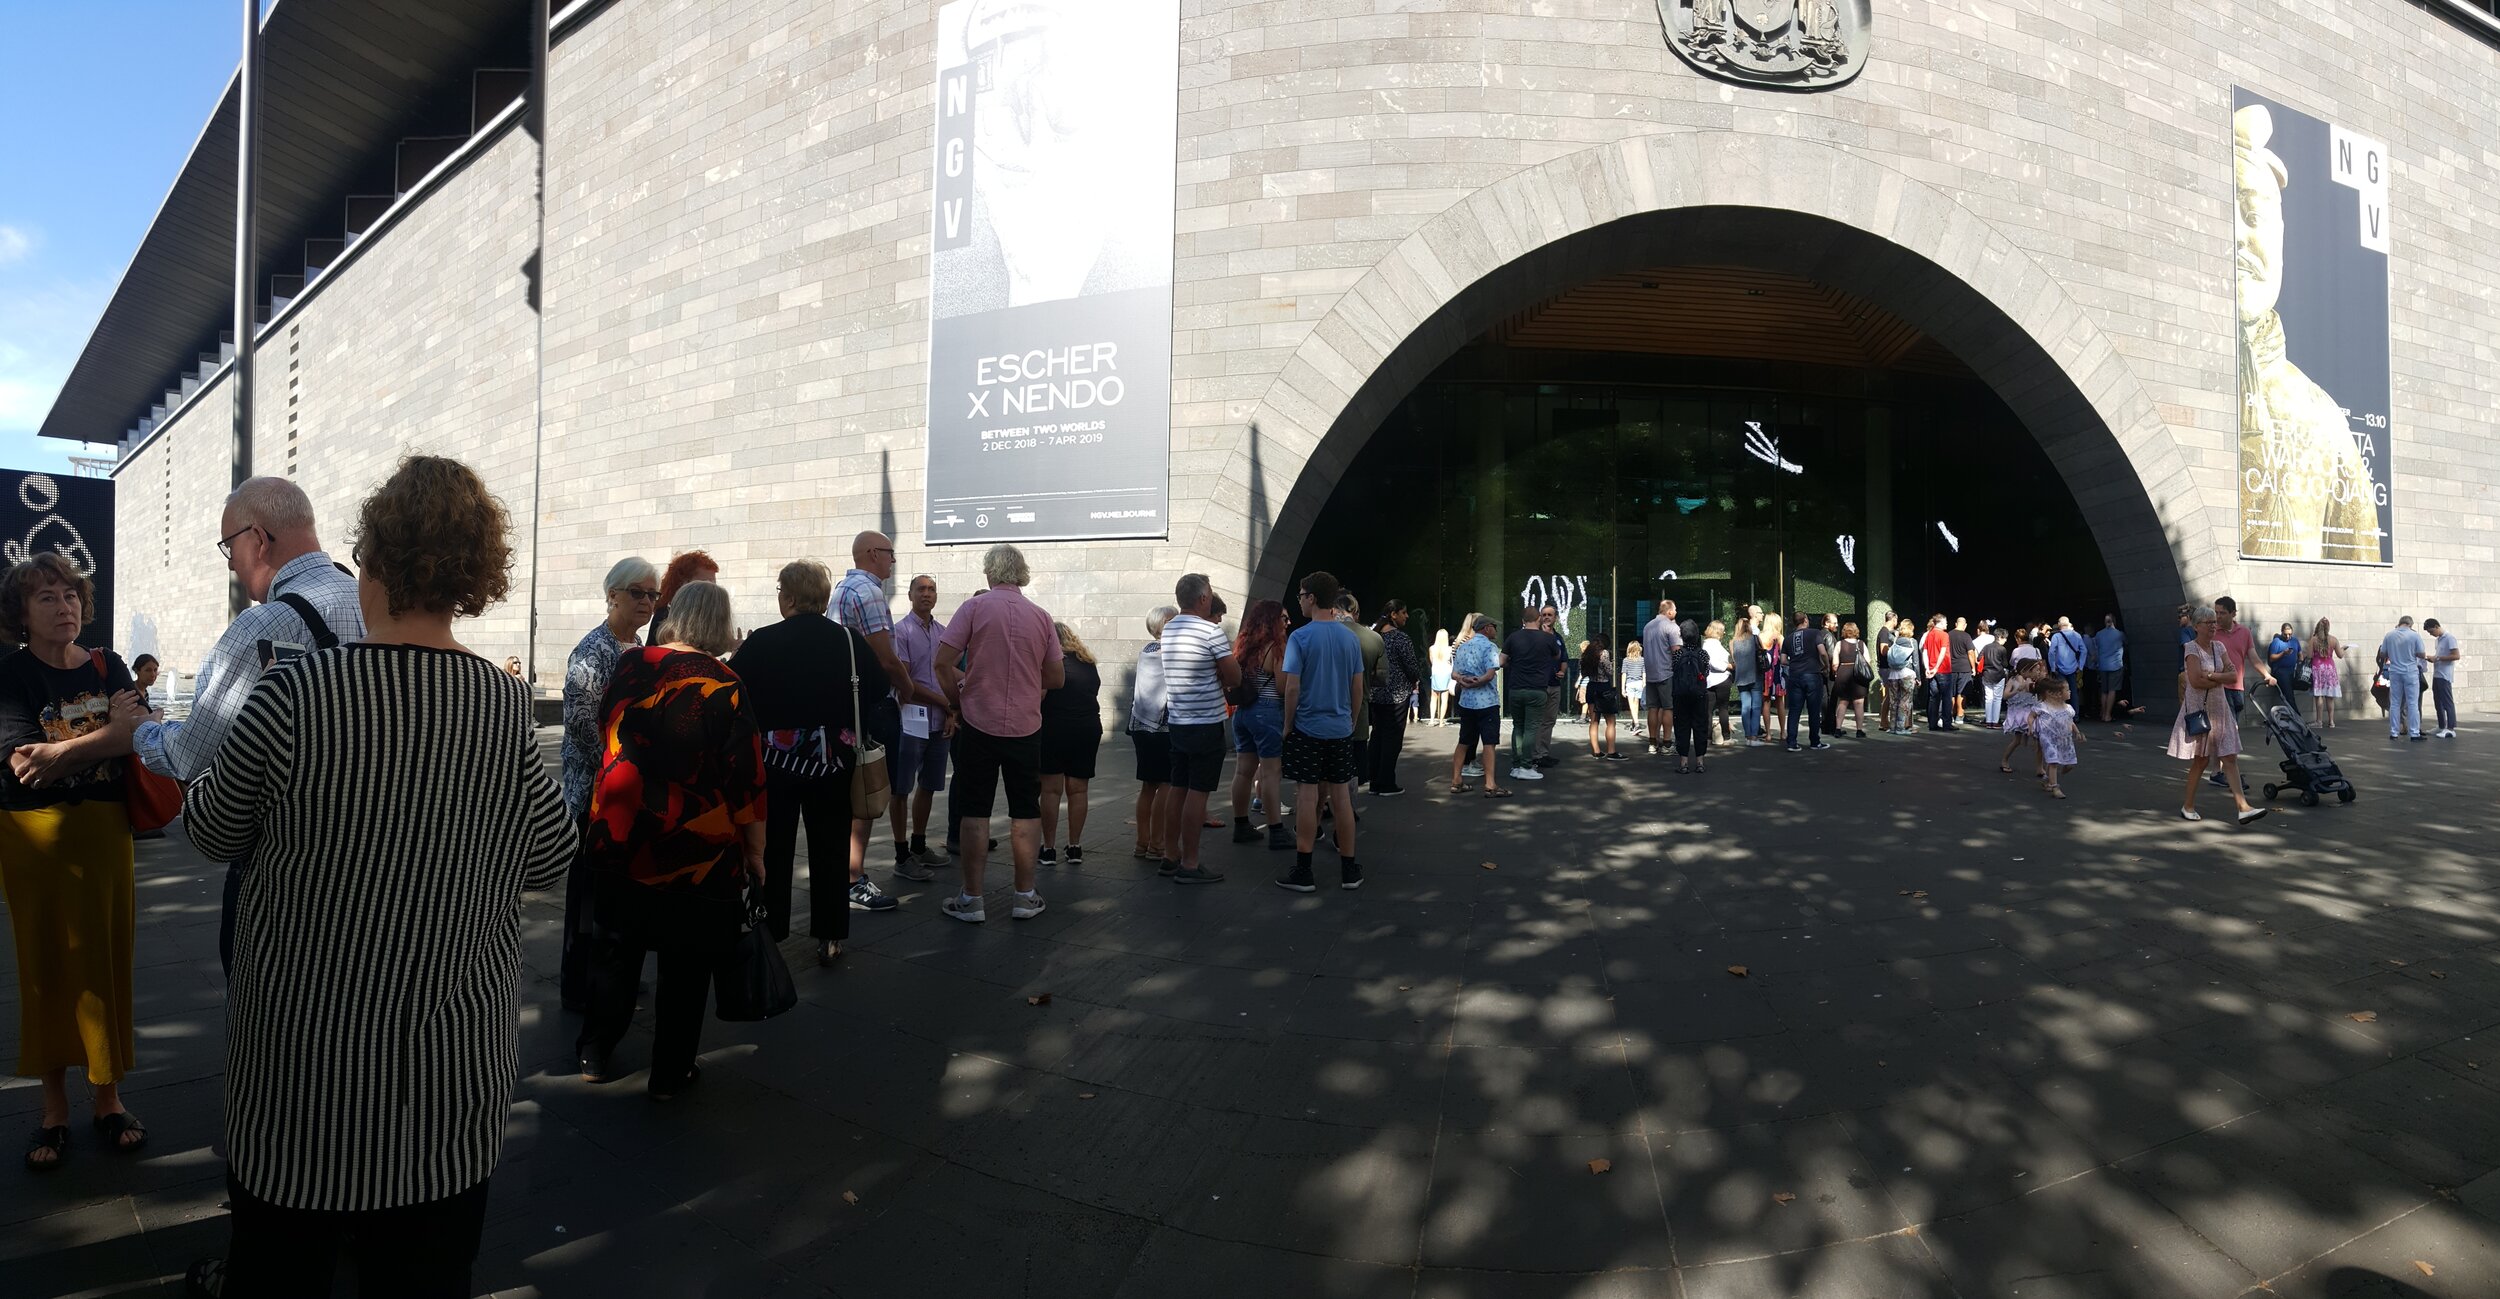 Waiting in Line at the NGV before opening. January 2019